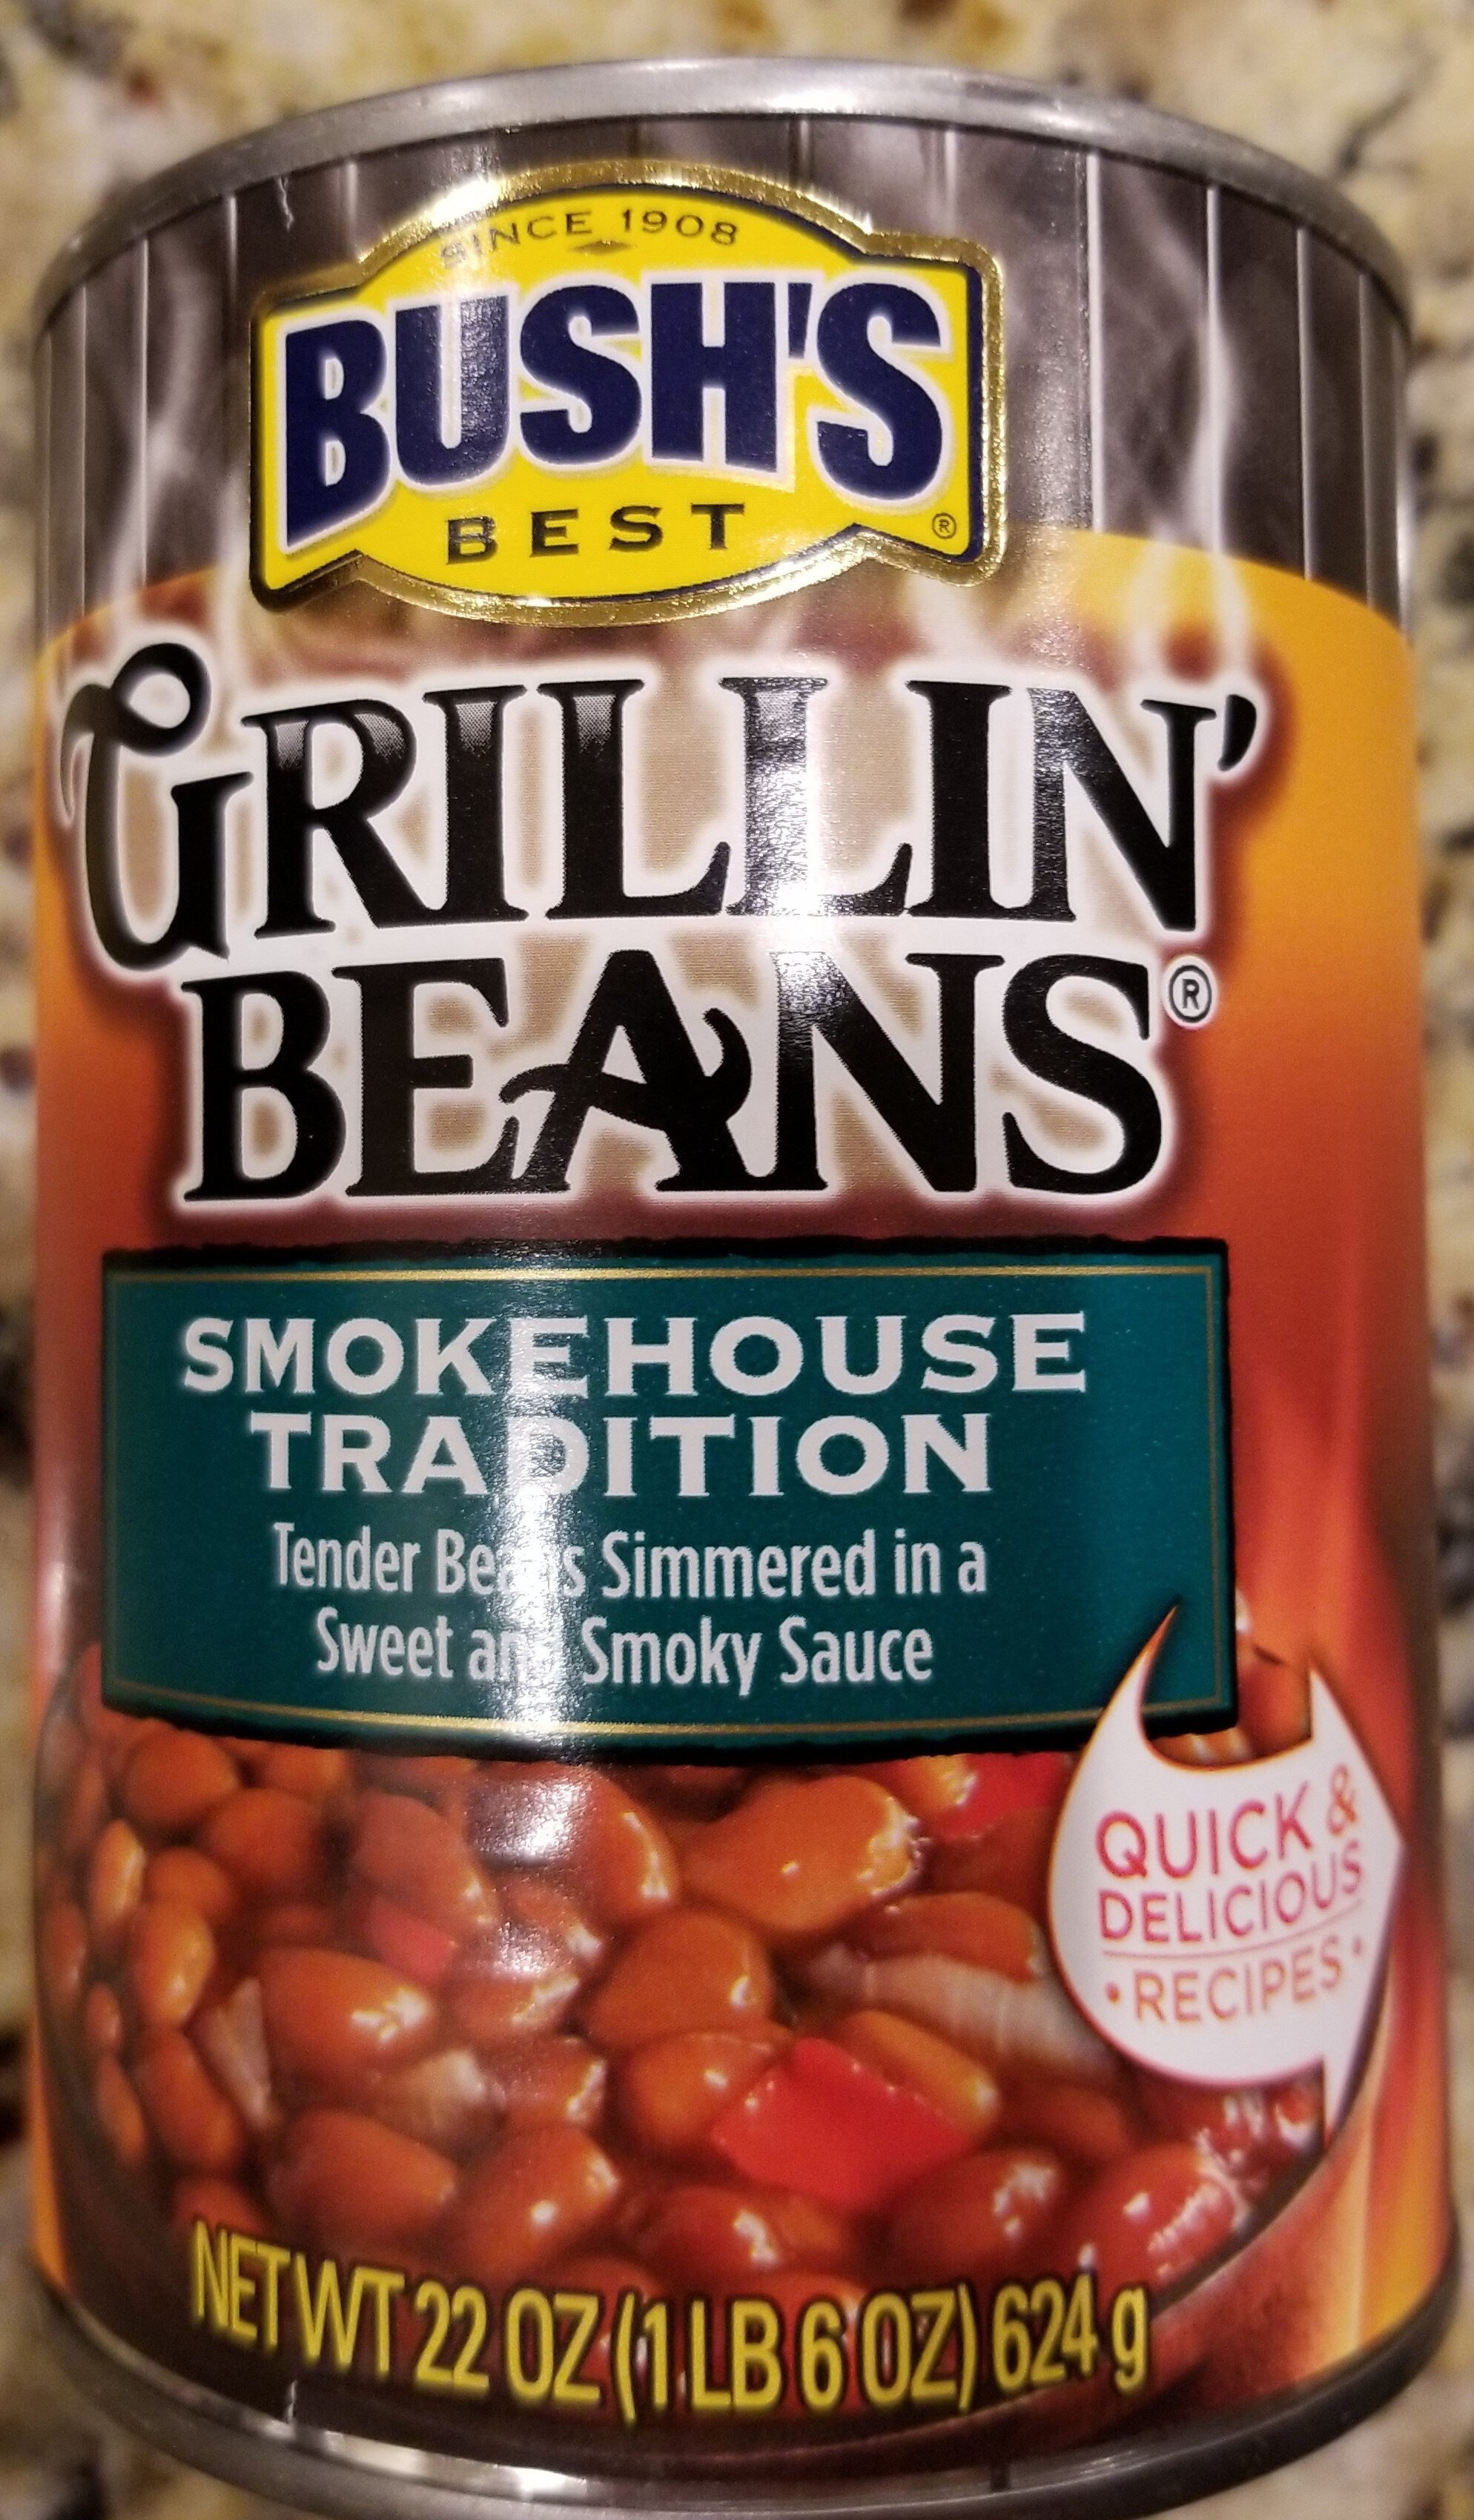 Smokehouse Tradition Grillin' Beans - Product